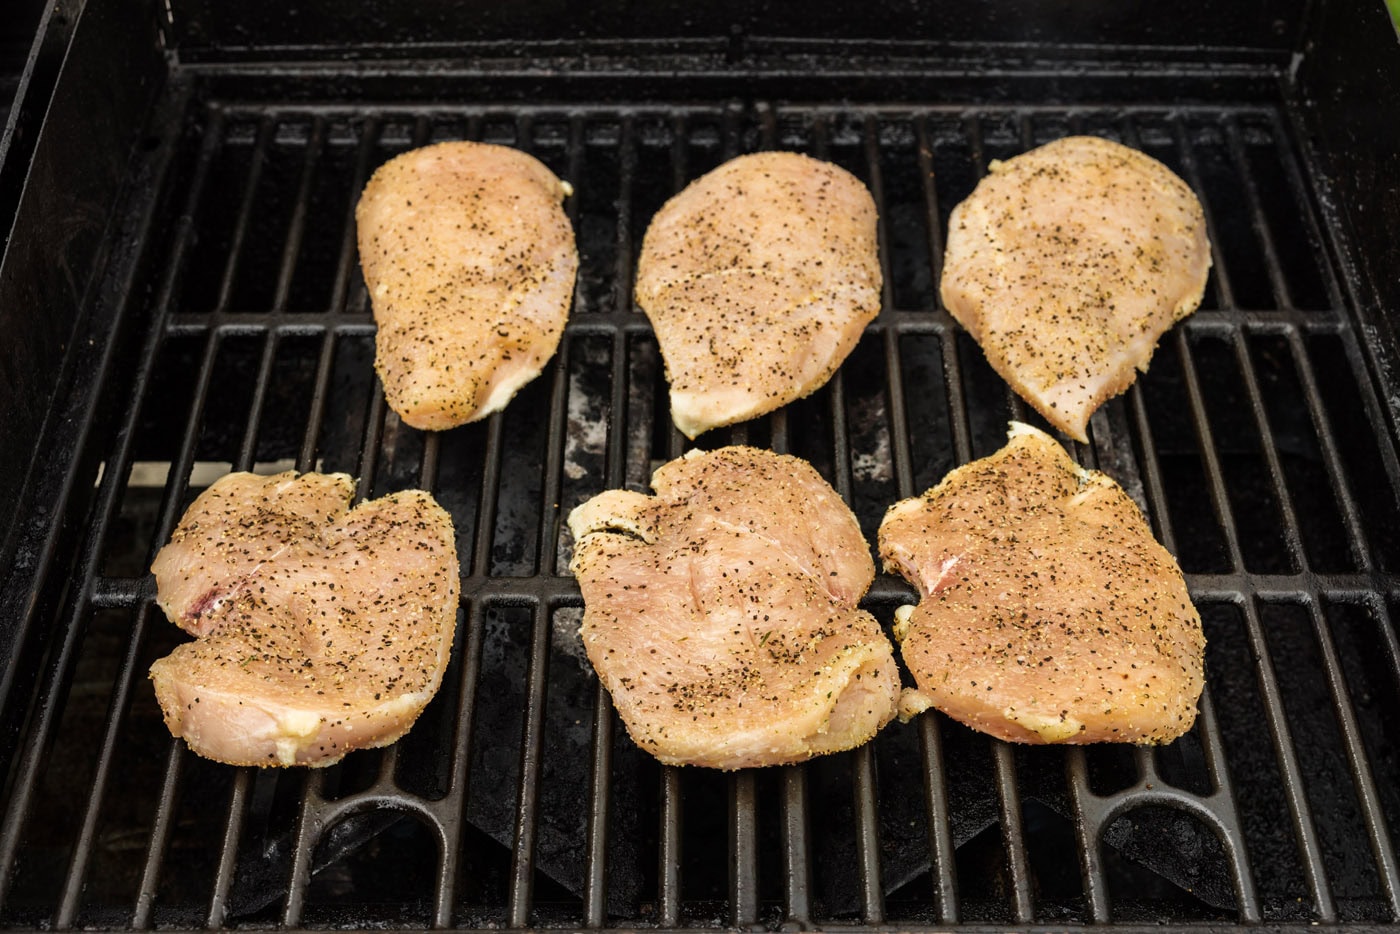 seasoned chicken breasts cooking on the grill